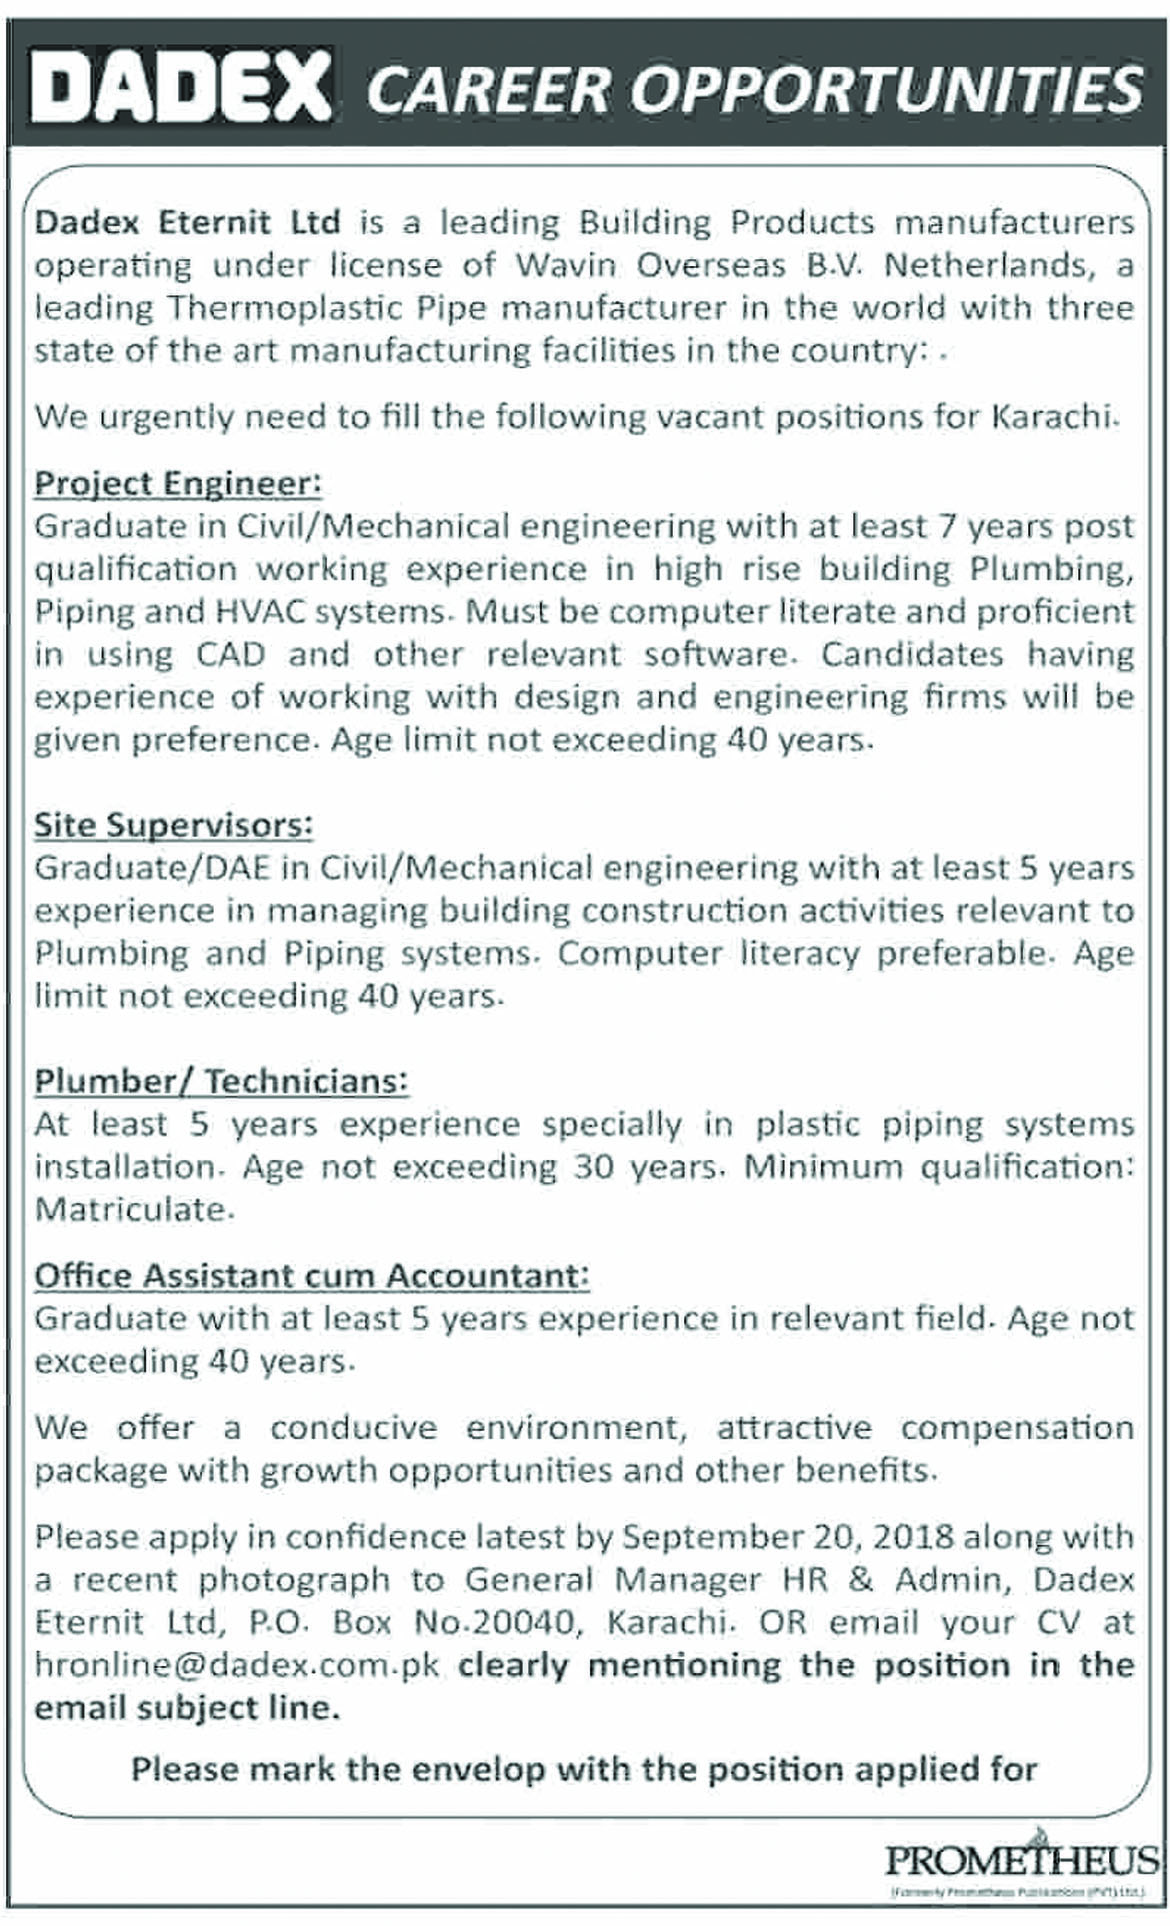 Jobs In Dadex Eternit Limited 10 Sep 2018